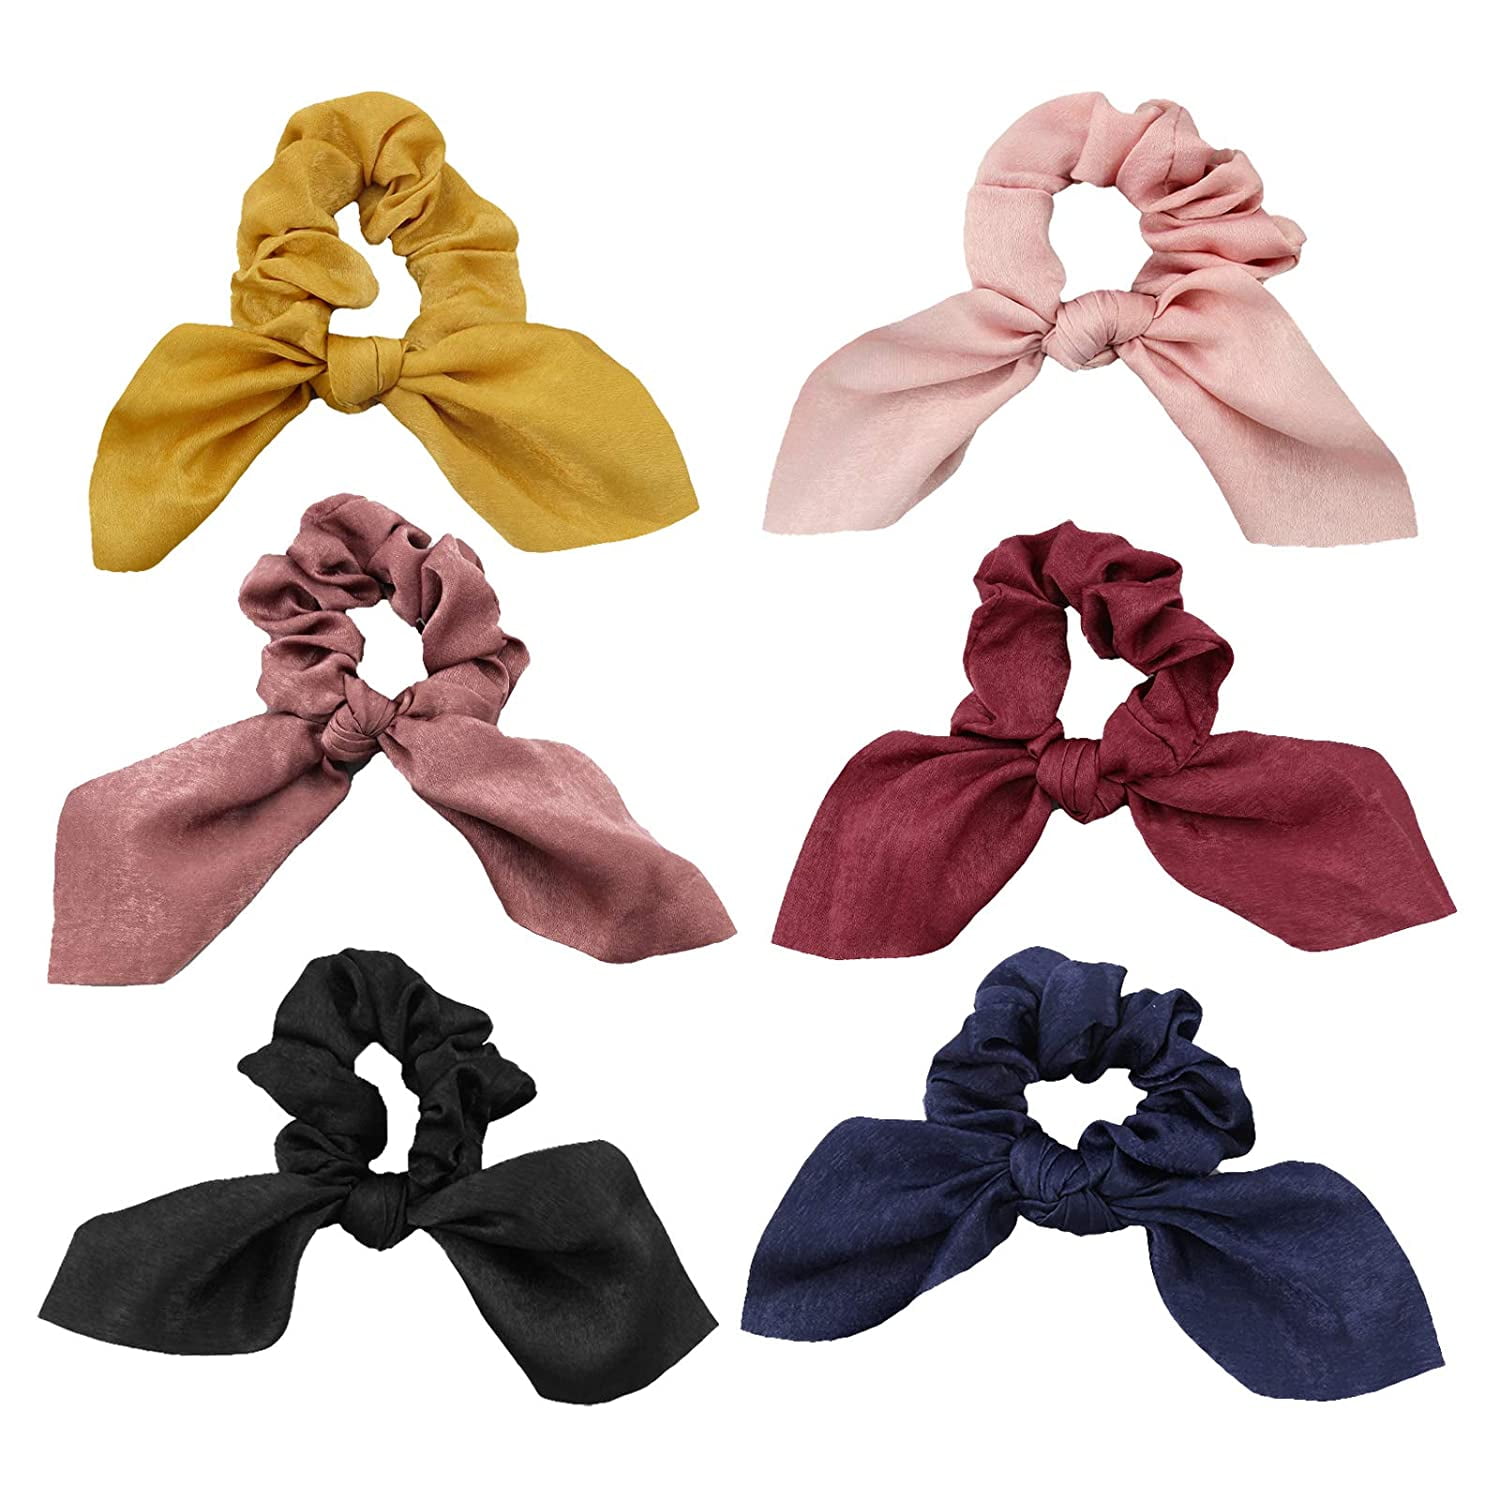 3" Bow Hair inch knot Clips Girls Baby Kids Elastic Bobbles School Quality Bows